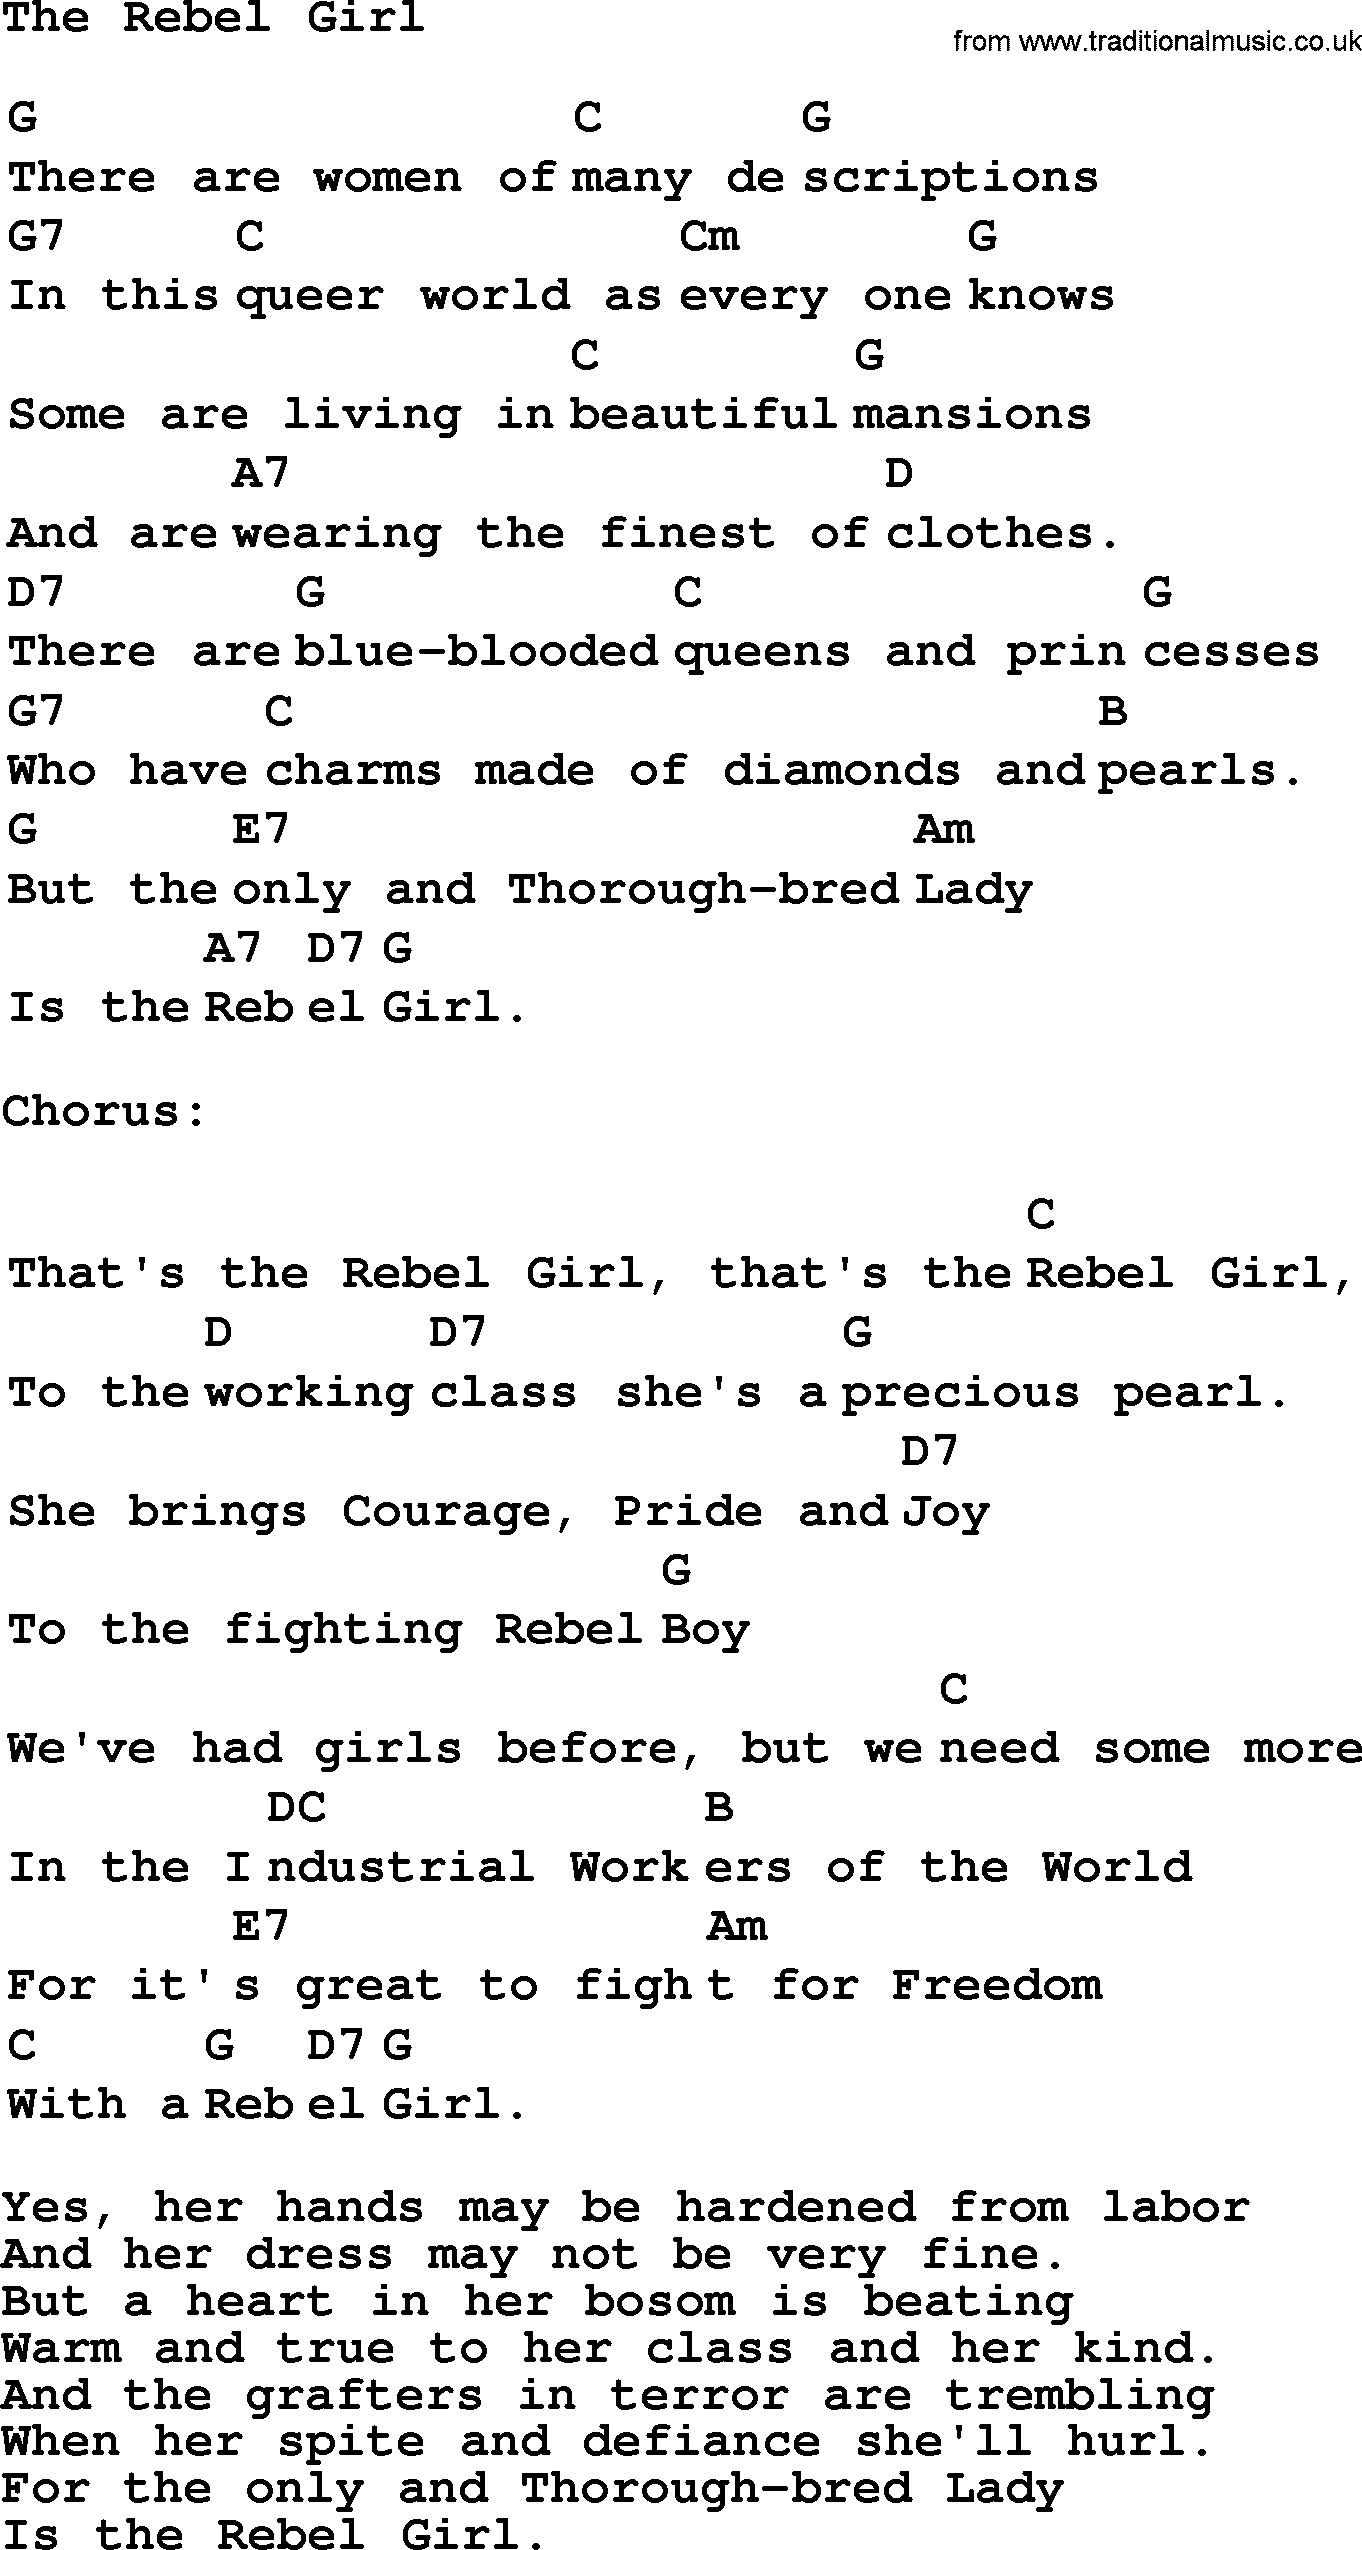 Top 1000 Most Popular Folk and Old-time Songs: Rebel Girl, lyrics and chords